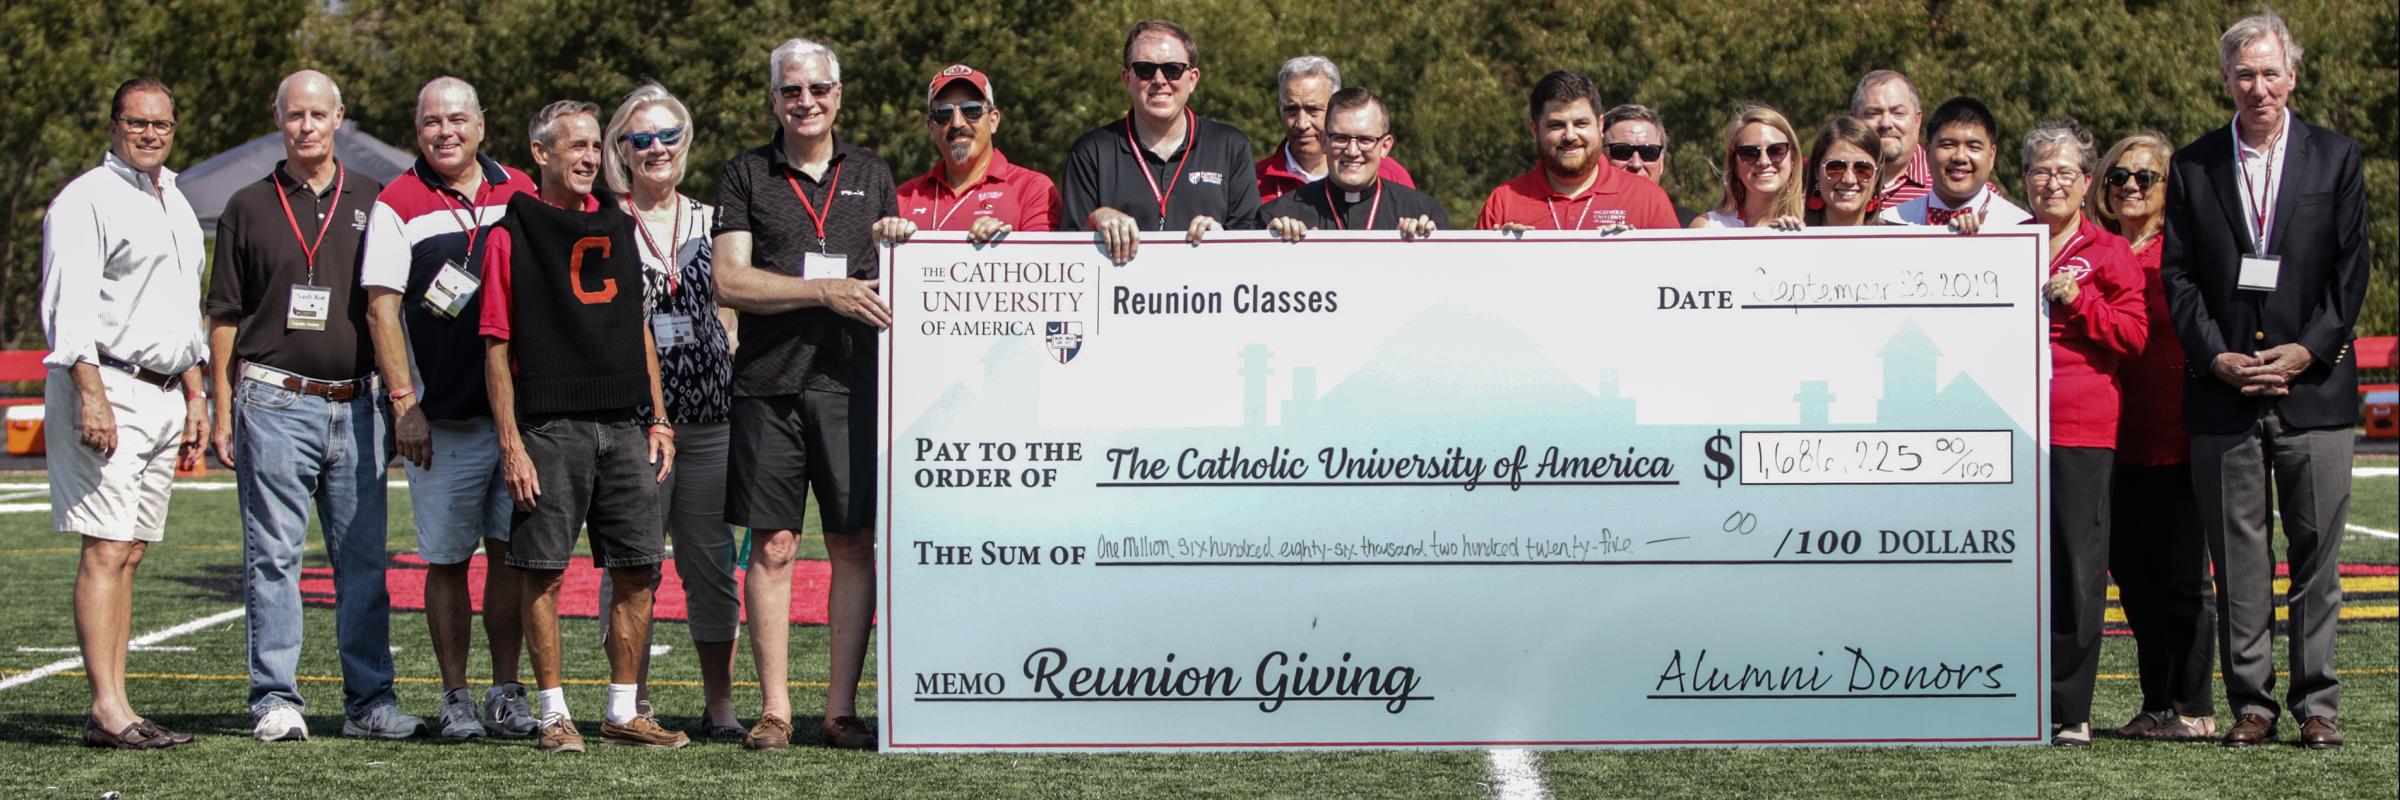 Reunion alumni holding a large check on a football field